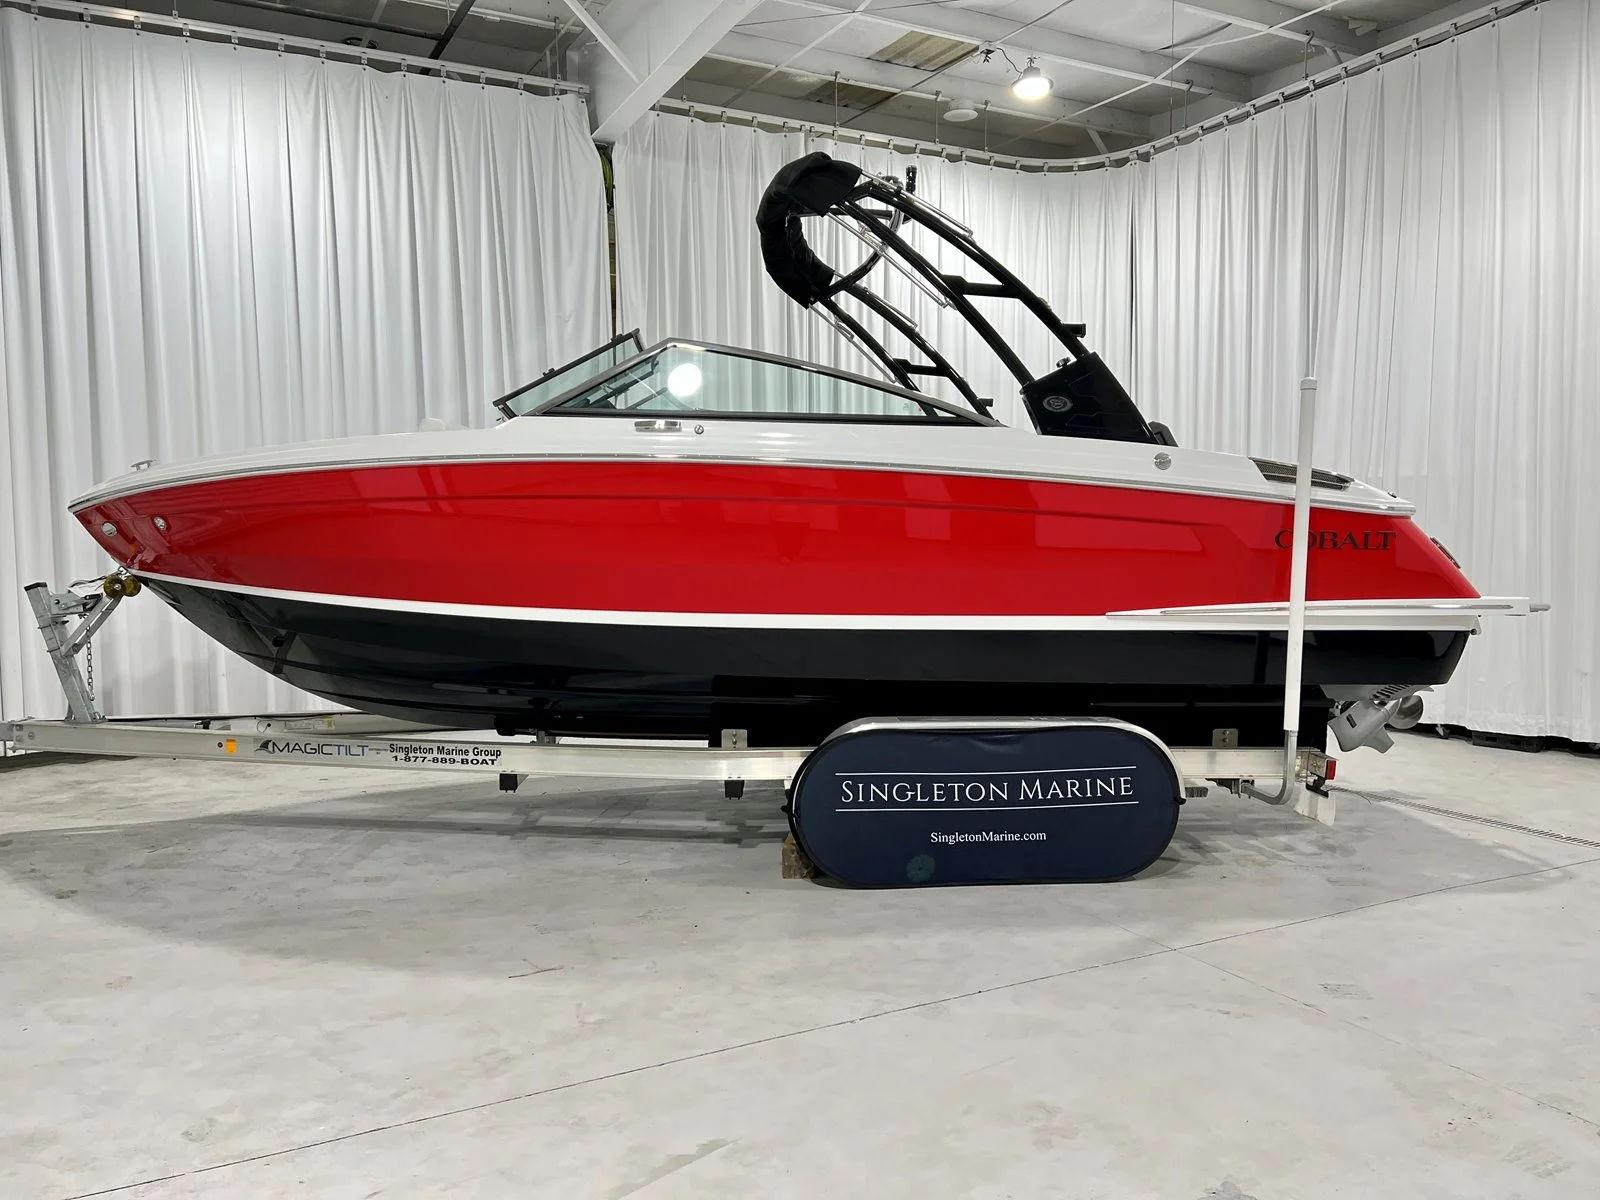 Page 85 of 229 - Boats for sale in South Carolina - boats.com